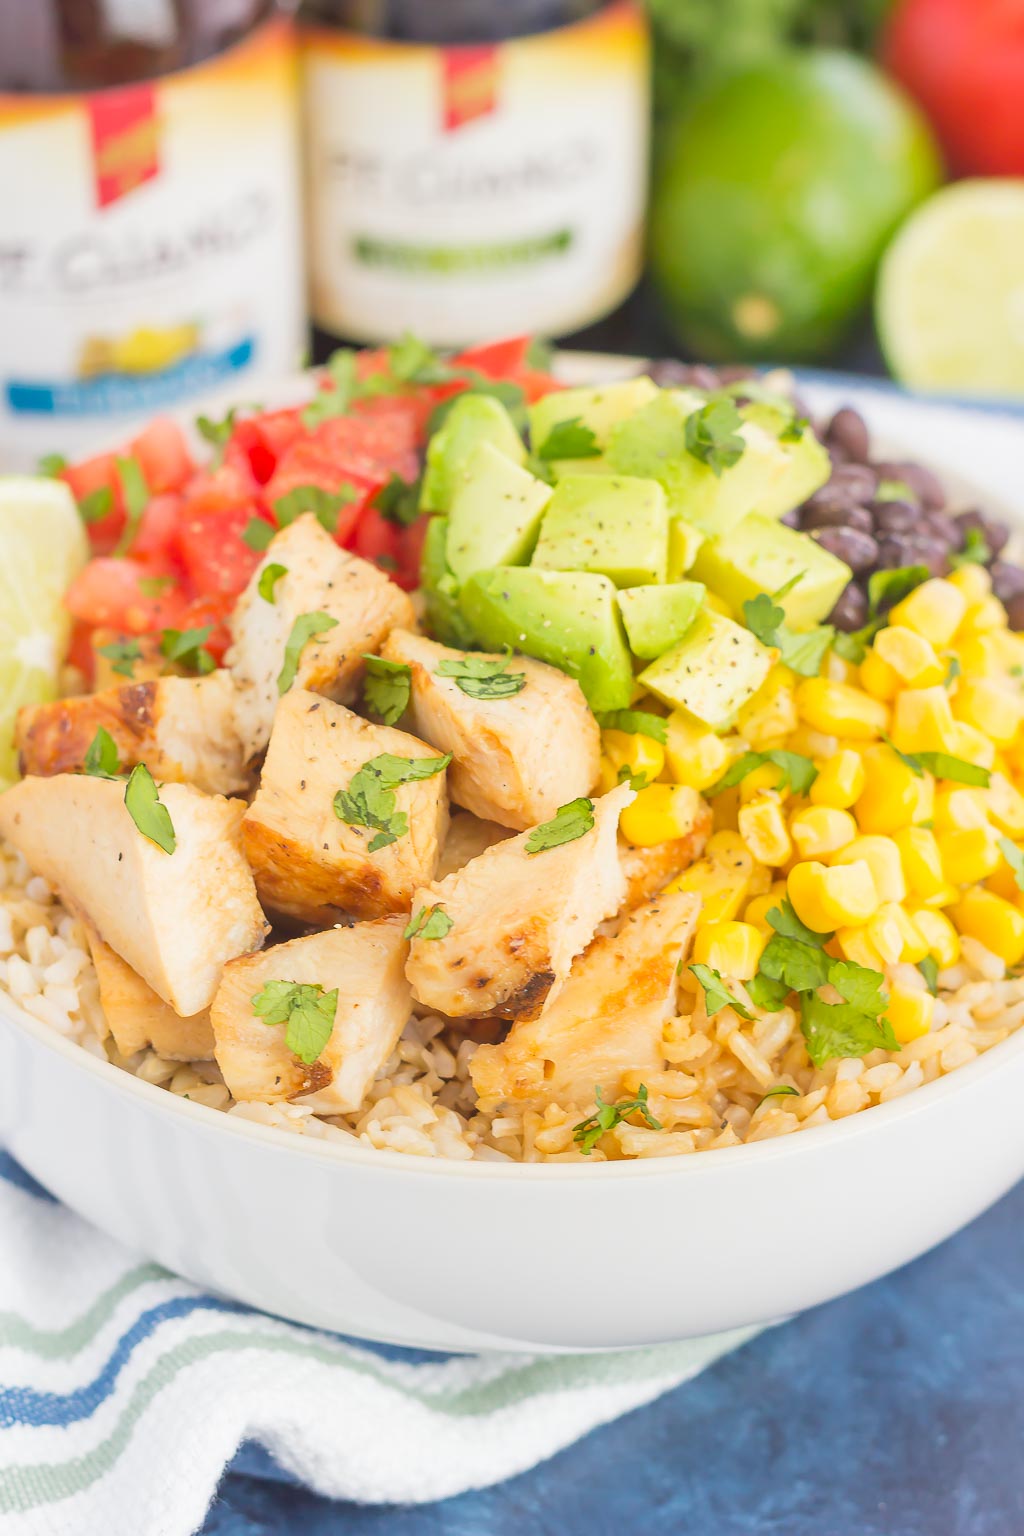 chicken burrito bowl topped with various garnishes